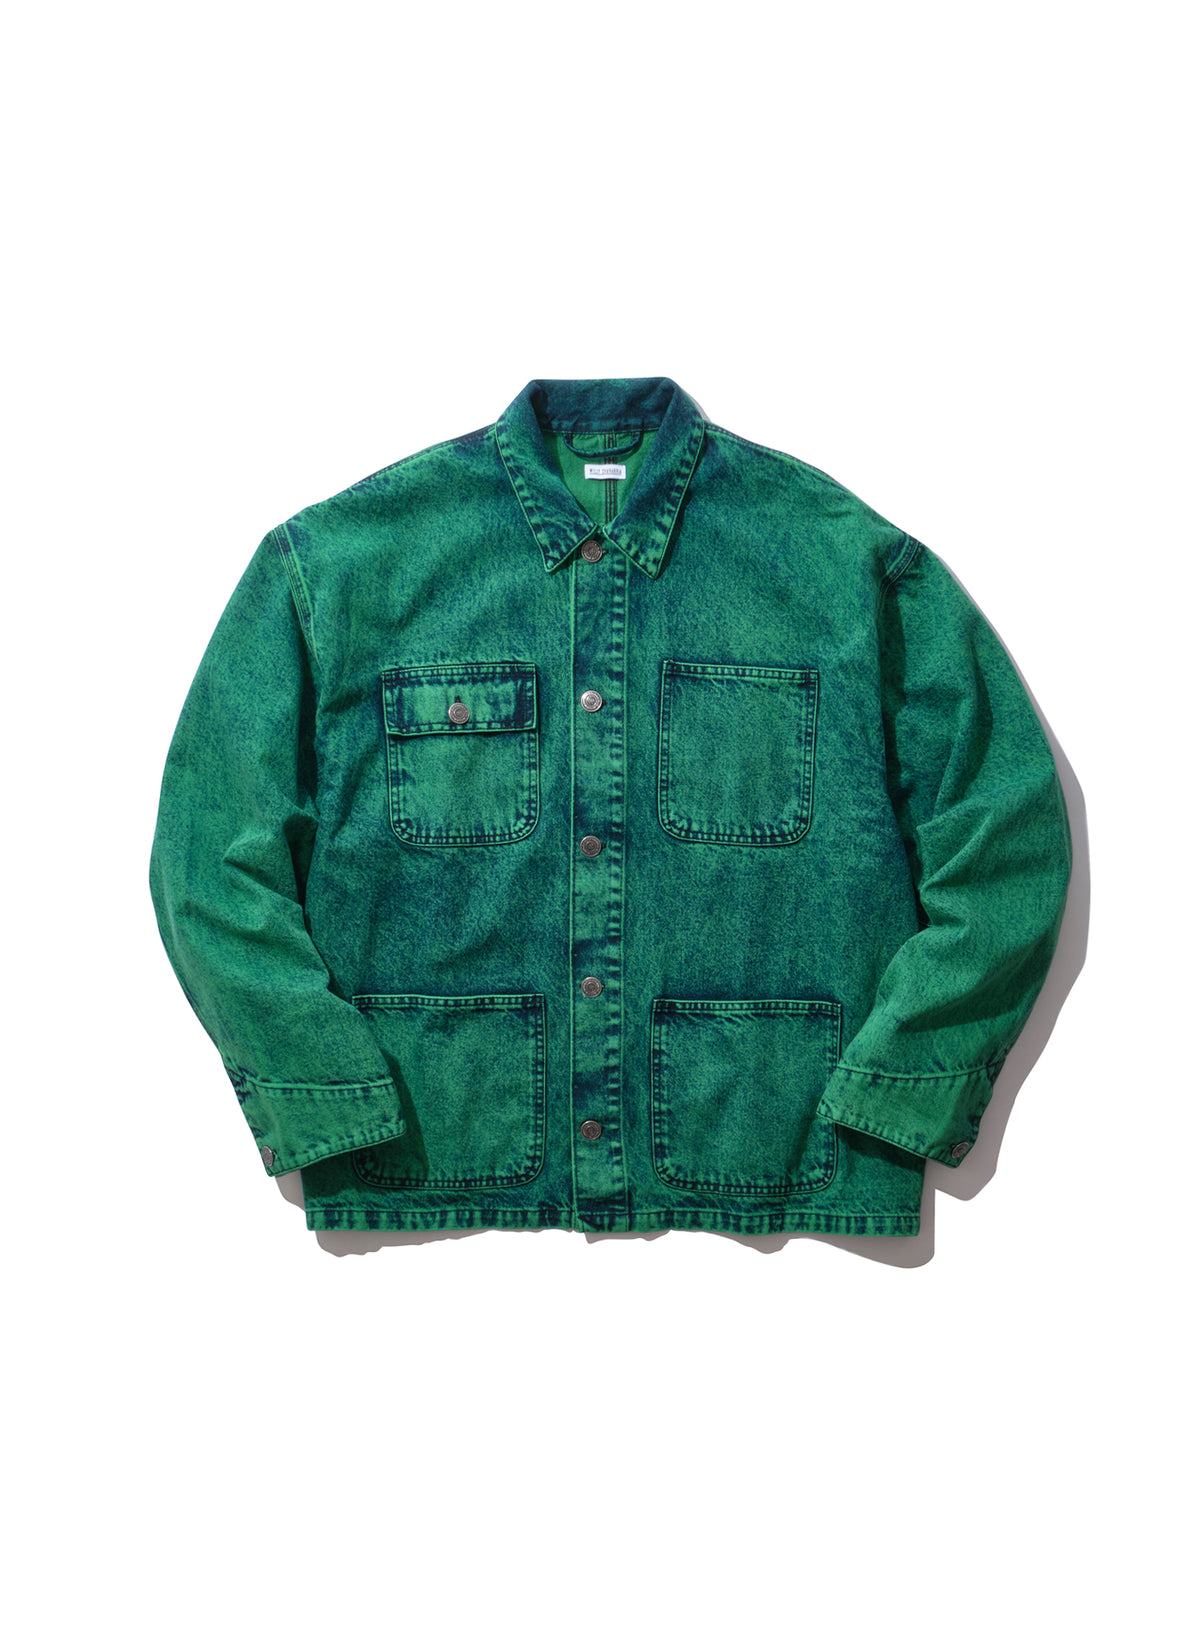 WILLY CHAVARRIA / BIG DADDY JACKET OVERD GREEN